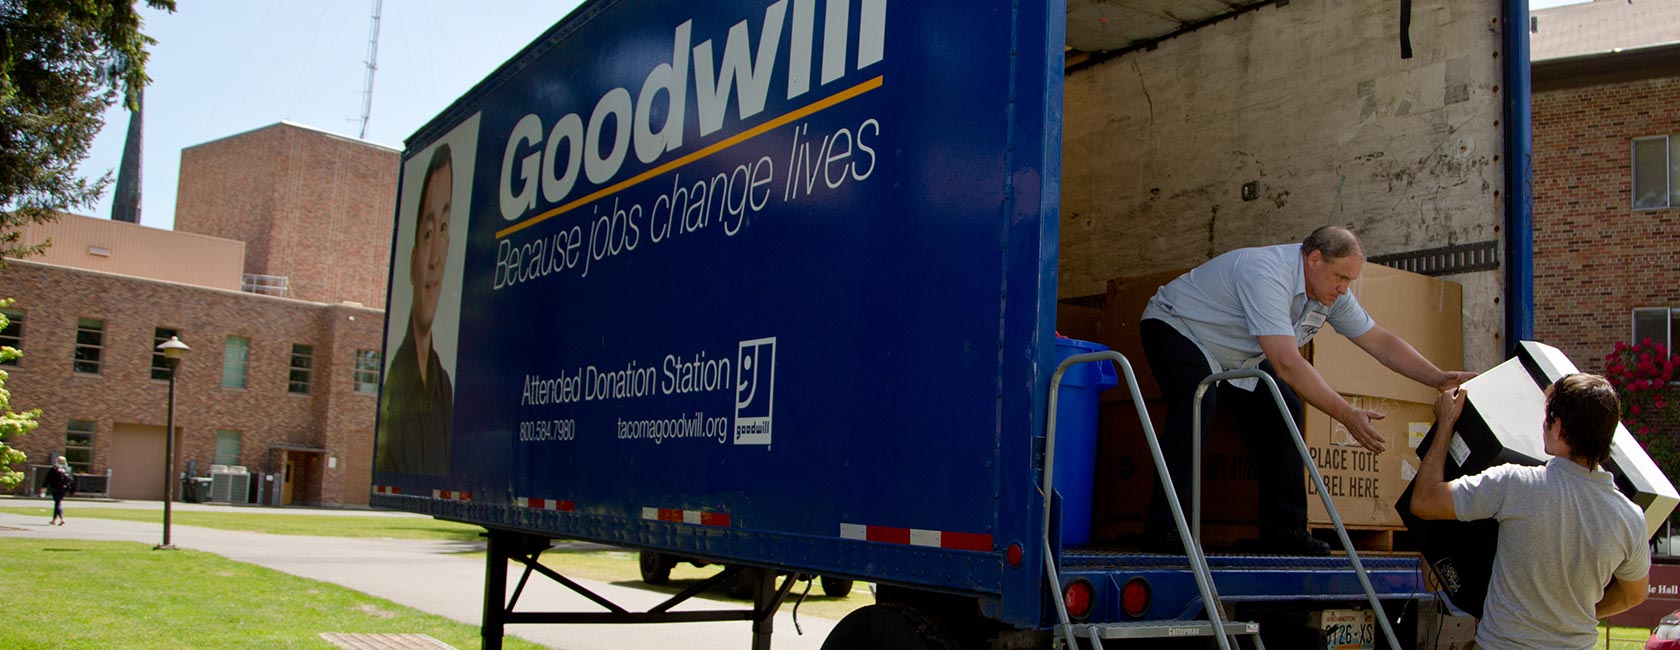 Goodwill trailer with a student giving an employee a TV